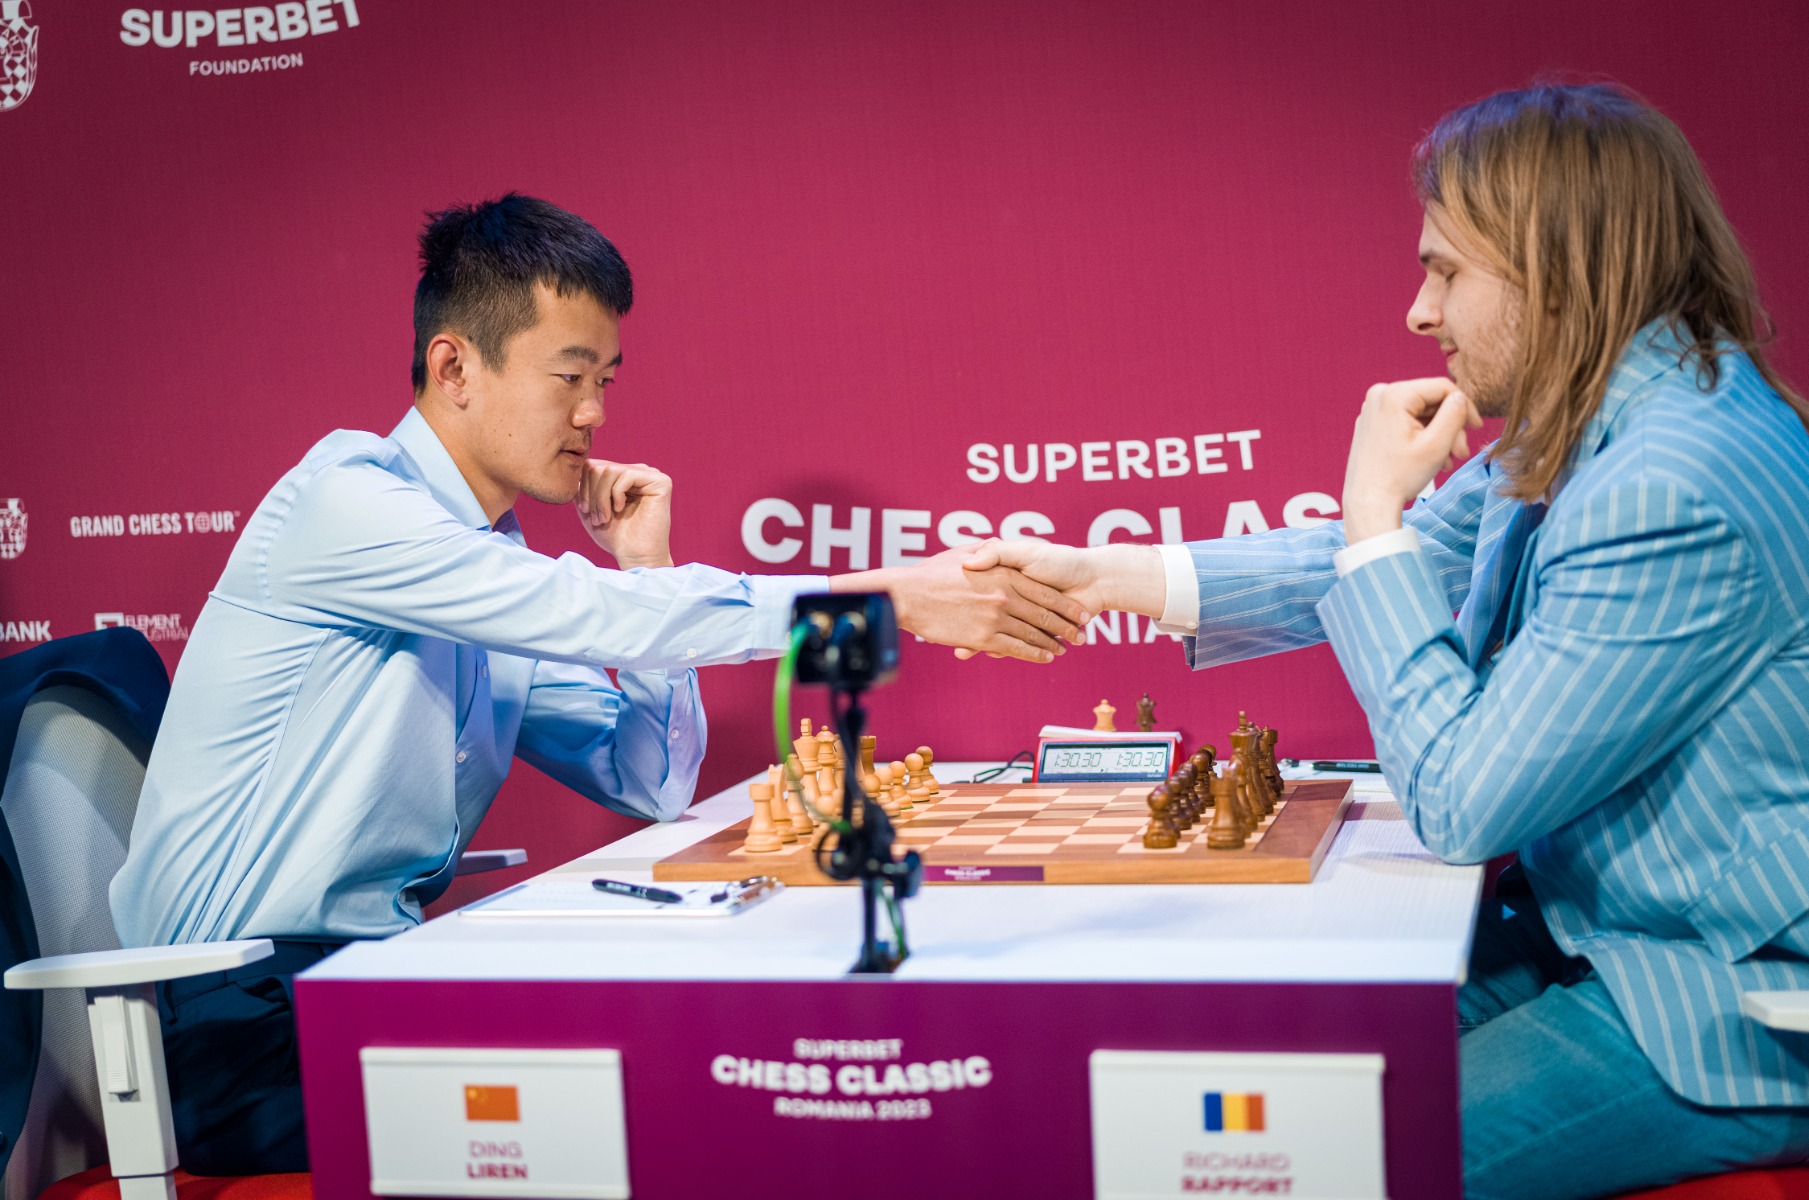 Ding Liren vs Ian Nepomniachtchi, Classical Chess Rating History